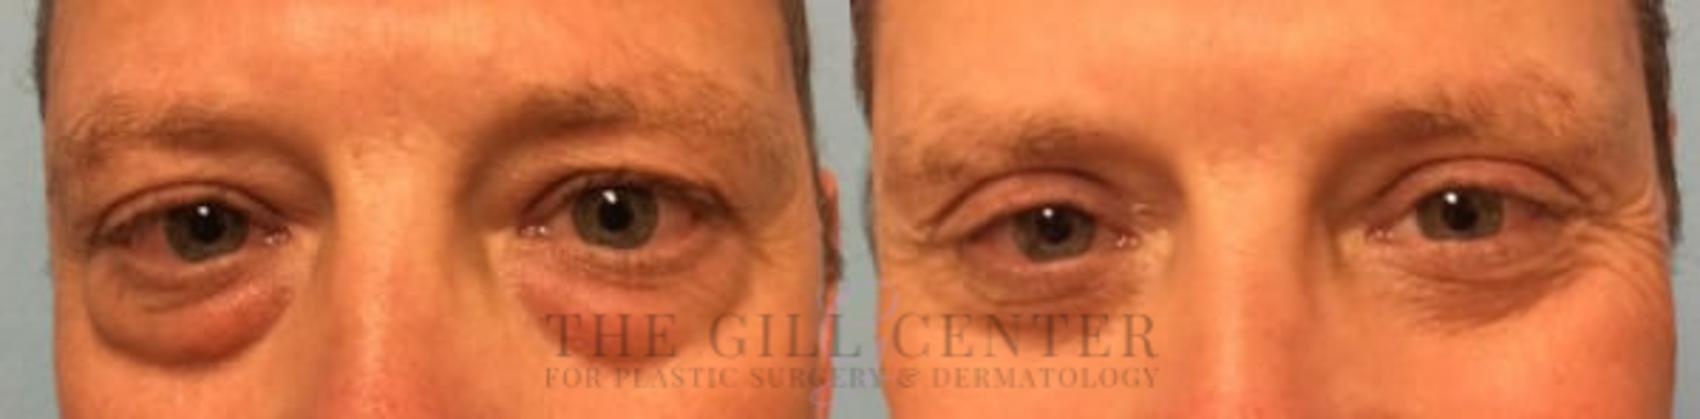 Eyelid Lift Case 149 Before & After Front | The Woodlands, TX | The Gill Center for Plastic Surgery and Dermatology